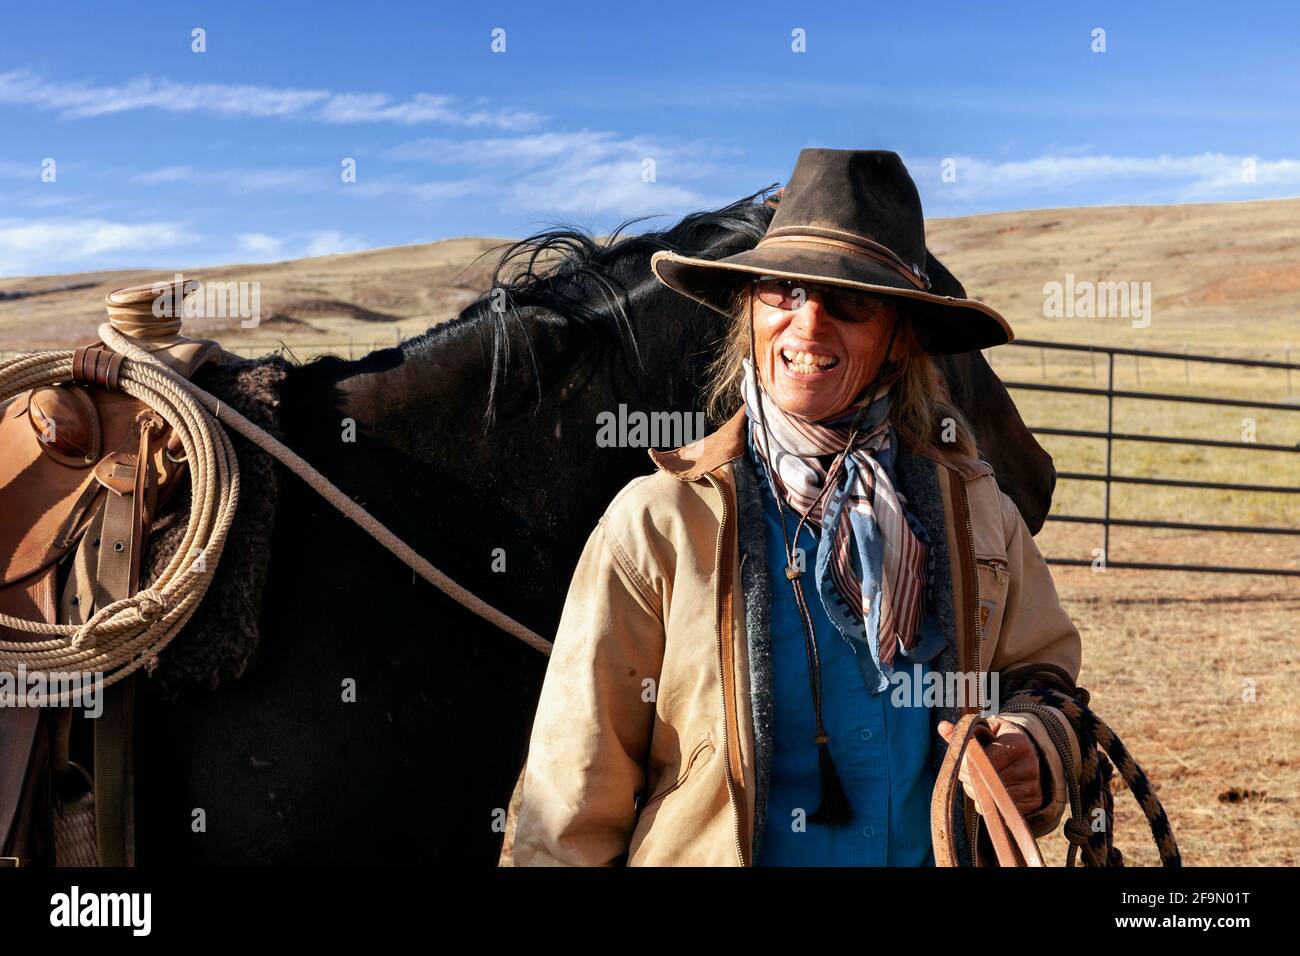 WY04130-00...WYOMING - Ranch hand cowgirl on the Willow Creek Ranch. Stock Photo